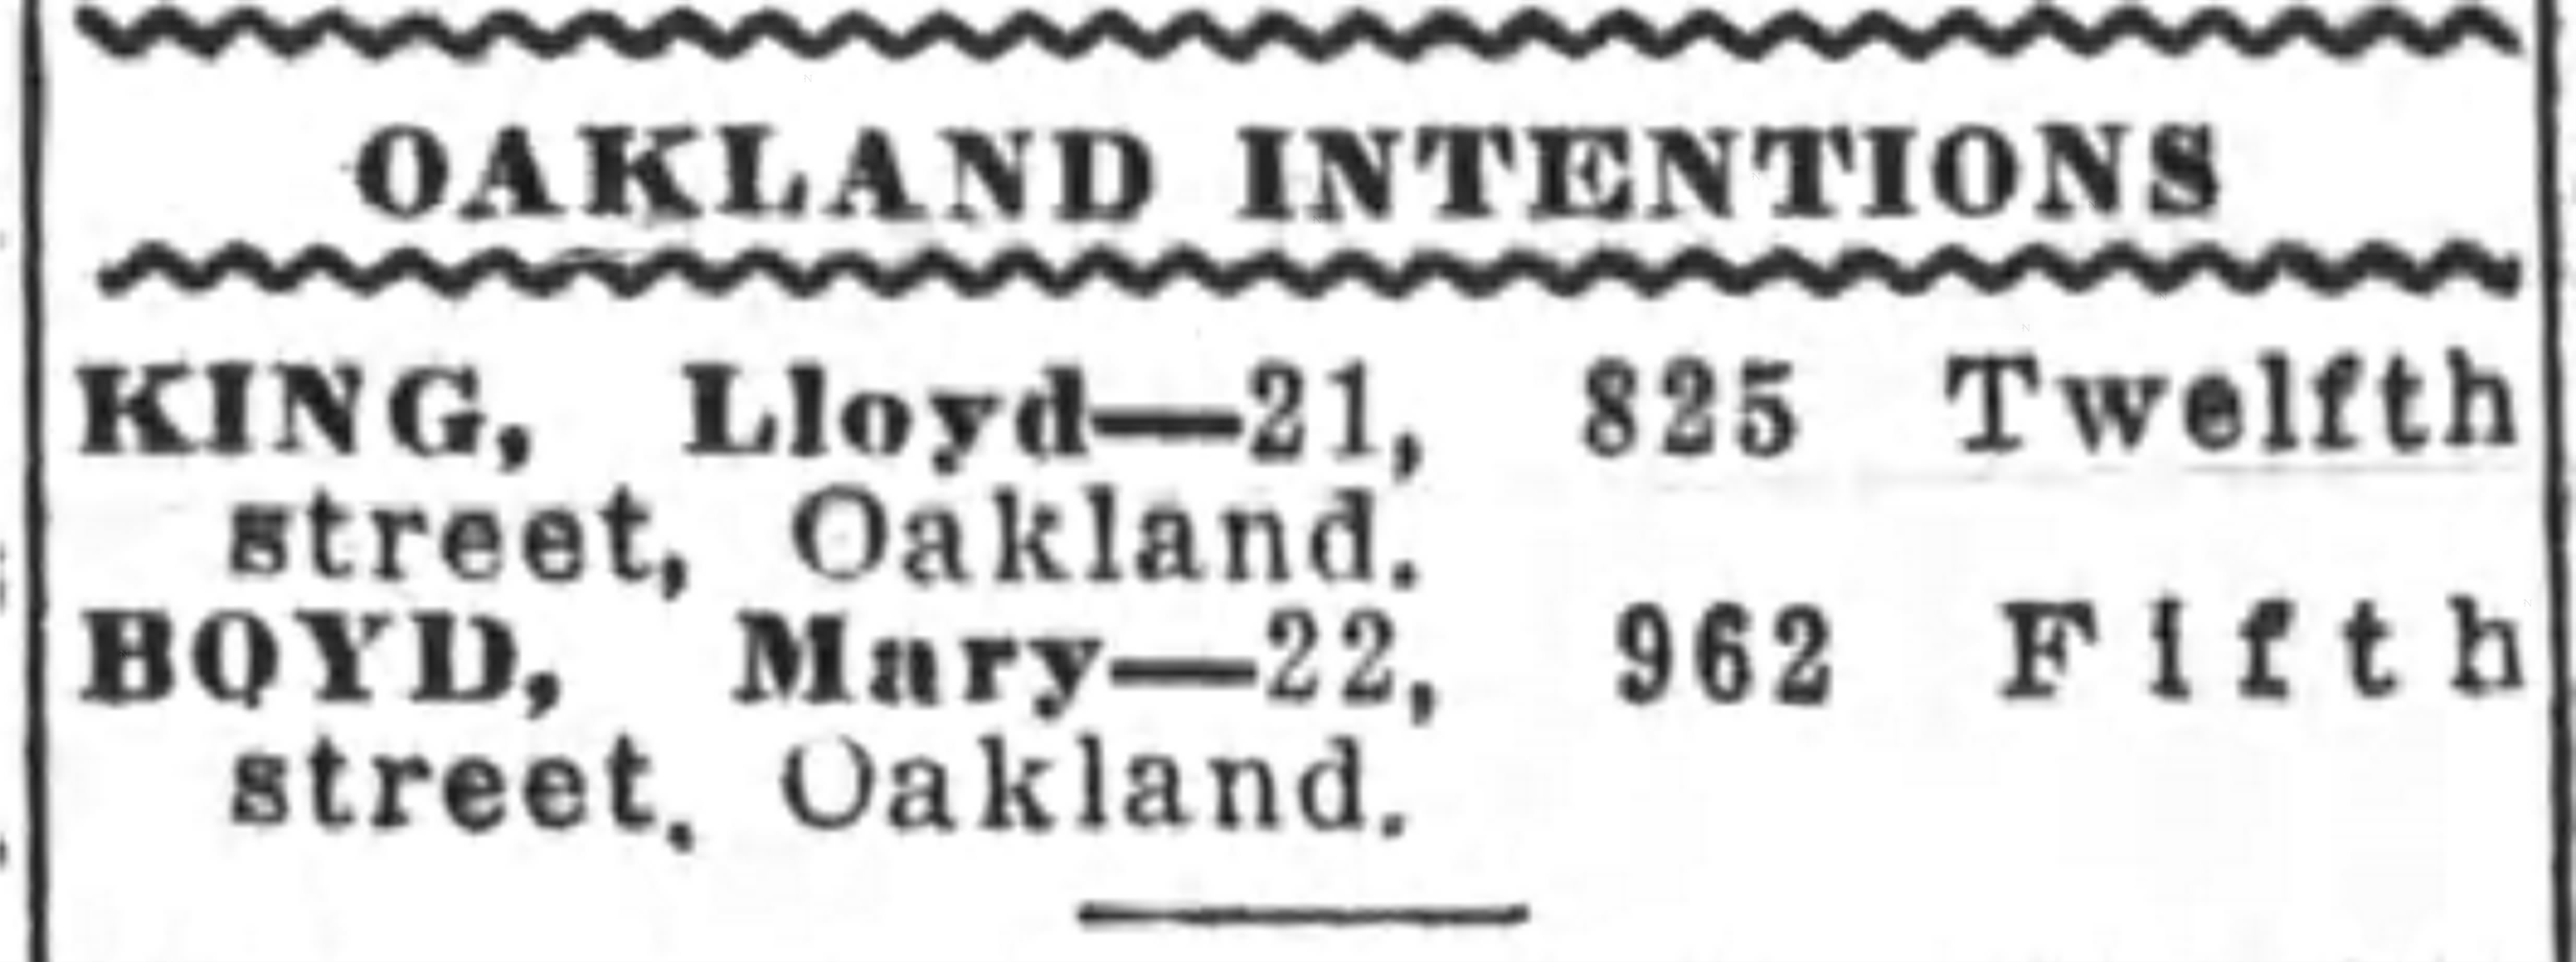 Marriage intention of Lloyd King and Mary Boyd, Oakland